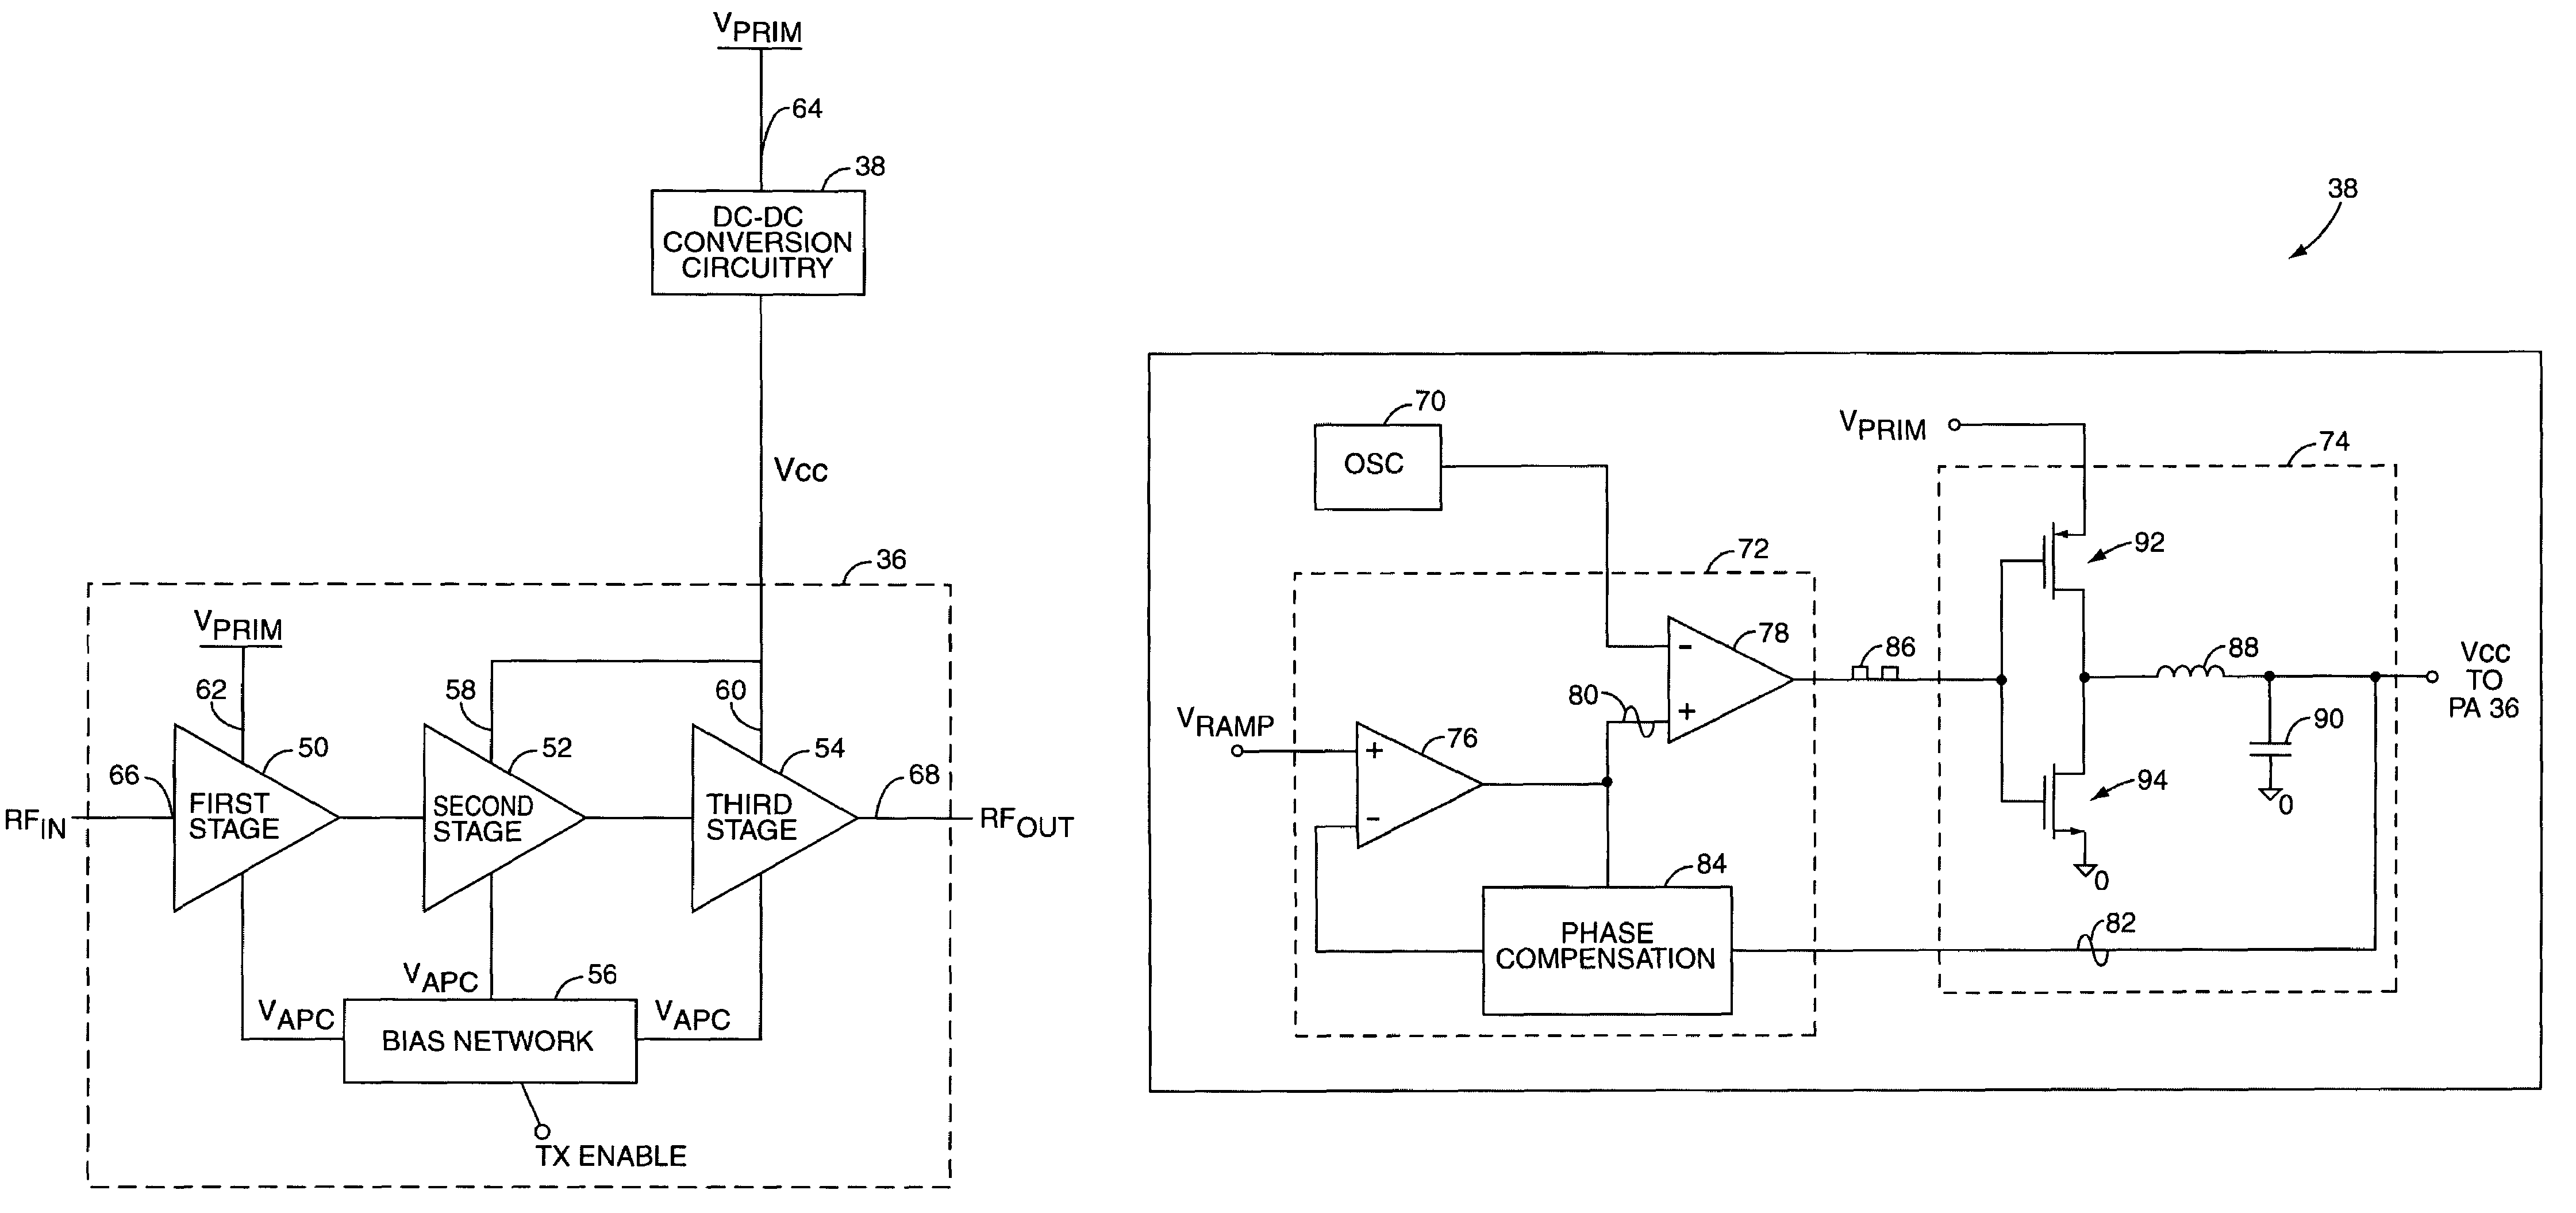 Power amplifier control using a switching power supply